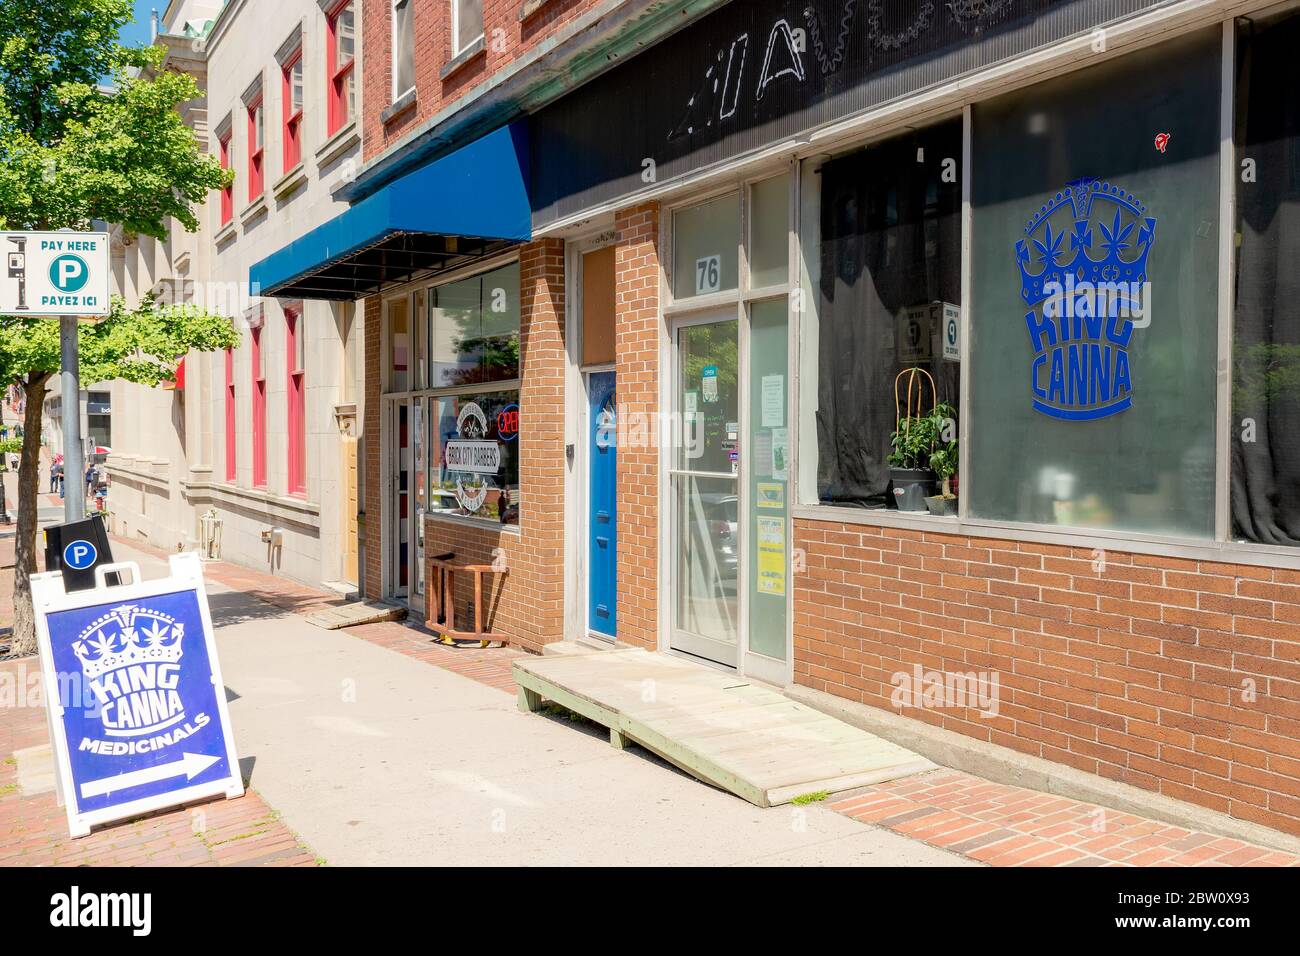 Saint John, NB, Canada - July 20, 2019: King Canna is an unlicensed cannabis dispensary. A sign on the sidewalk advertises 'medicinal'. Unlicensed can Stock Photo